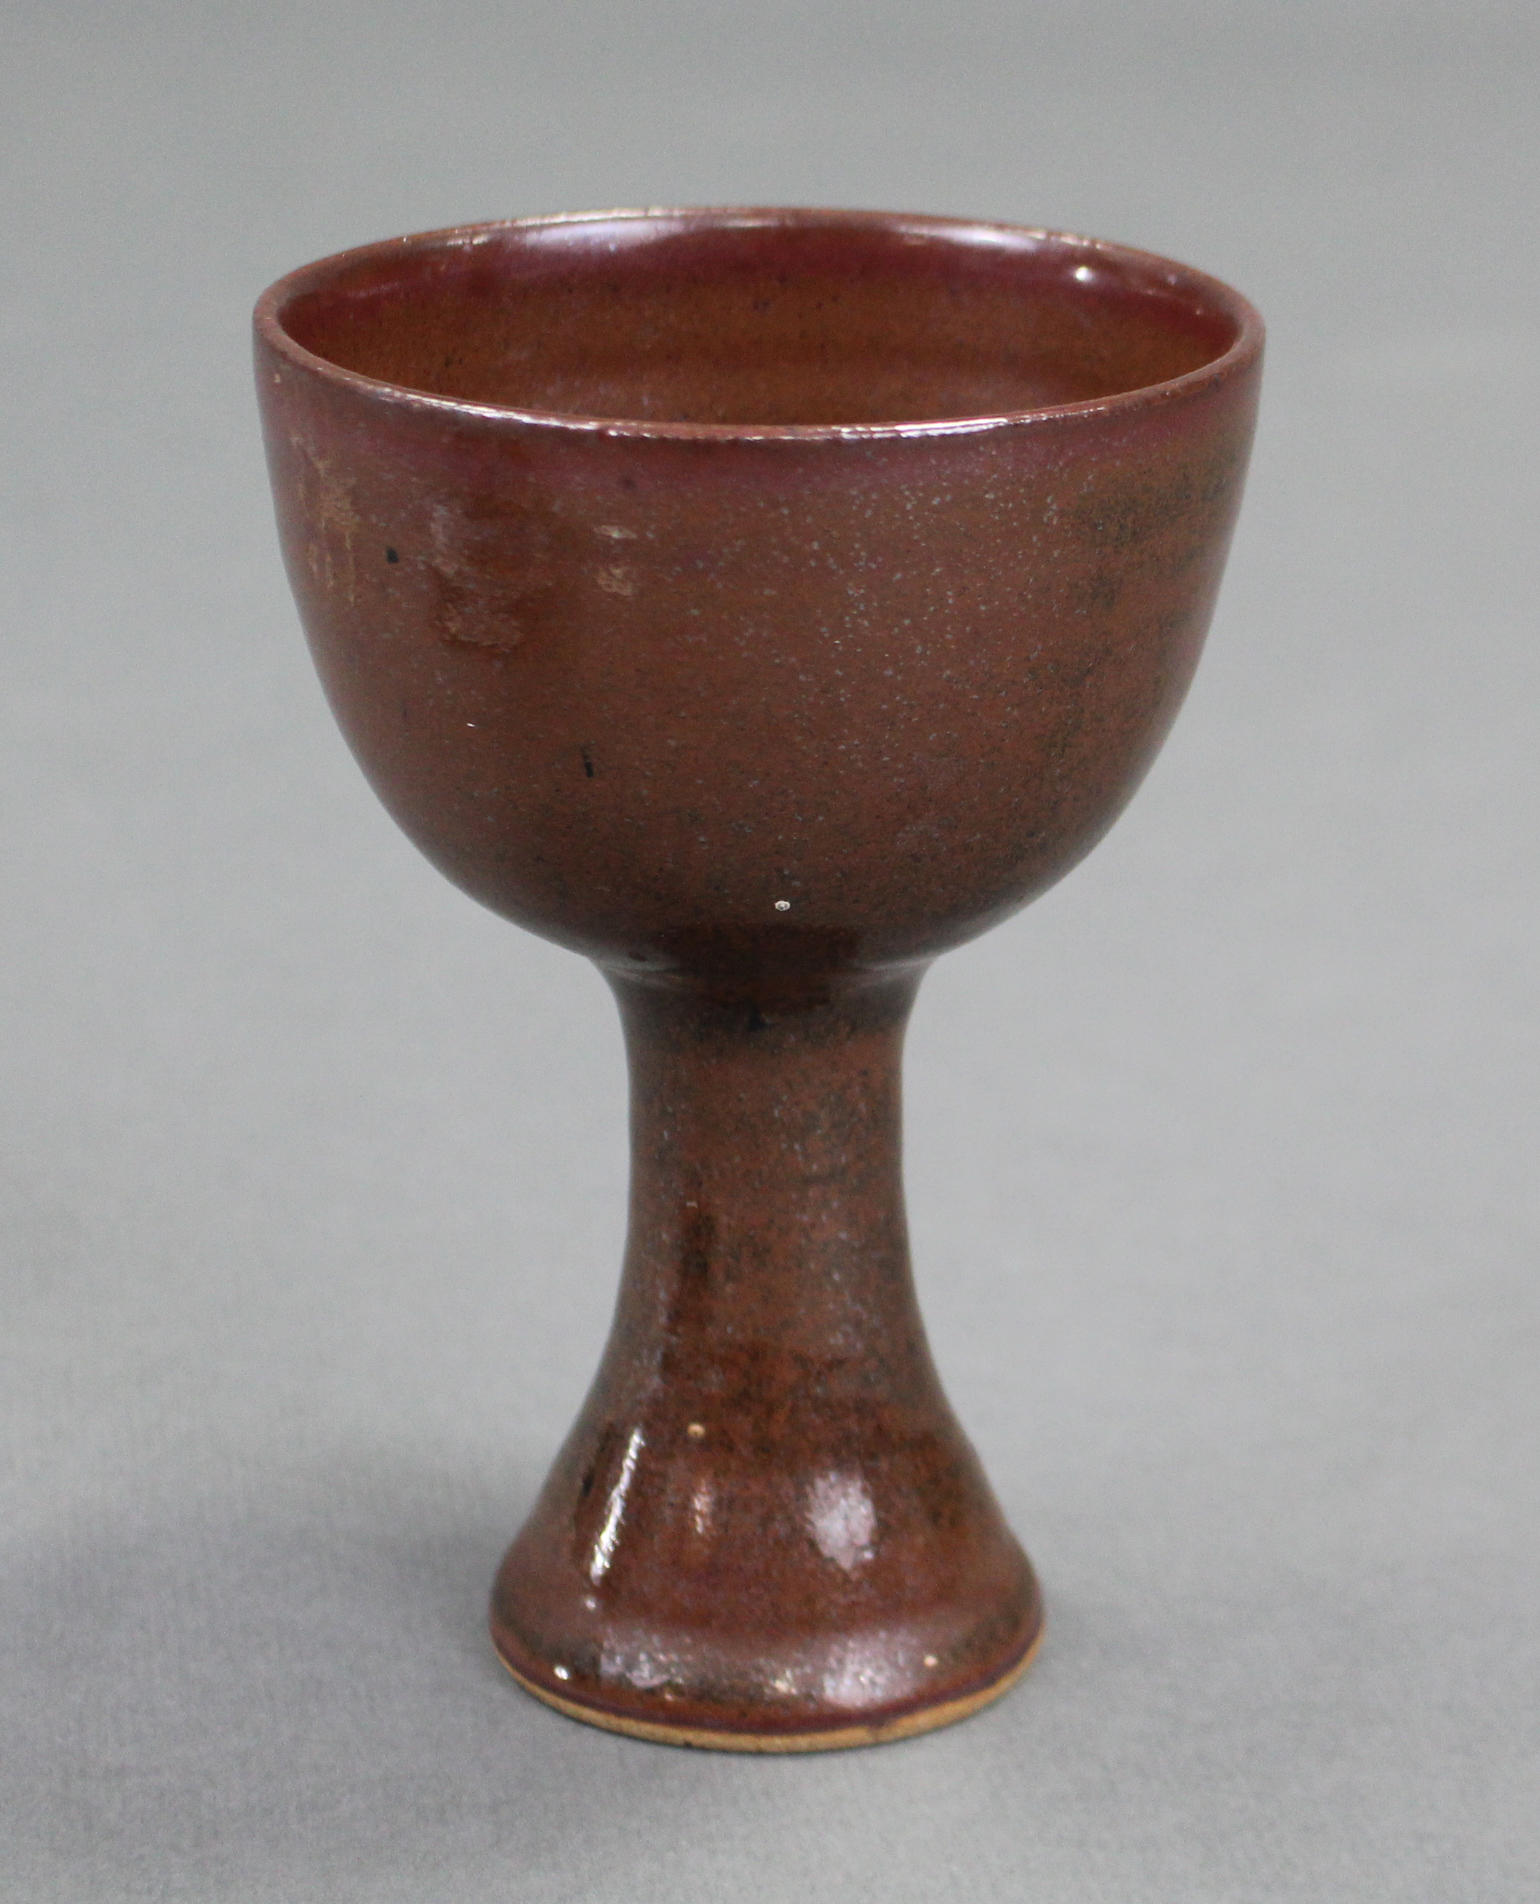 A Chinese brown-glazed stoneware stem cup; 4” diam. x 5½” high.